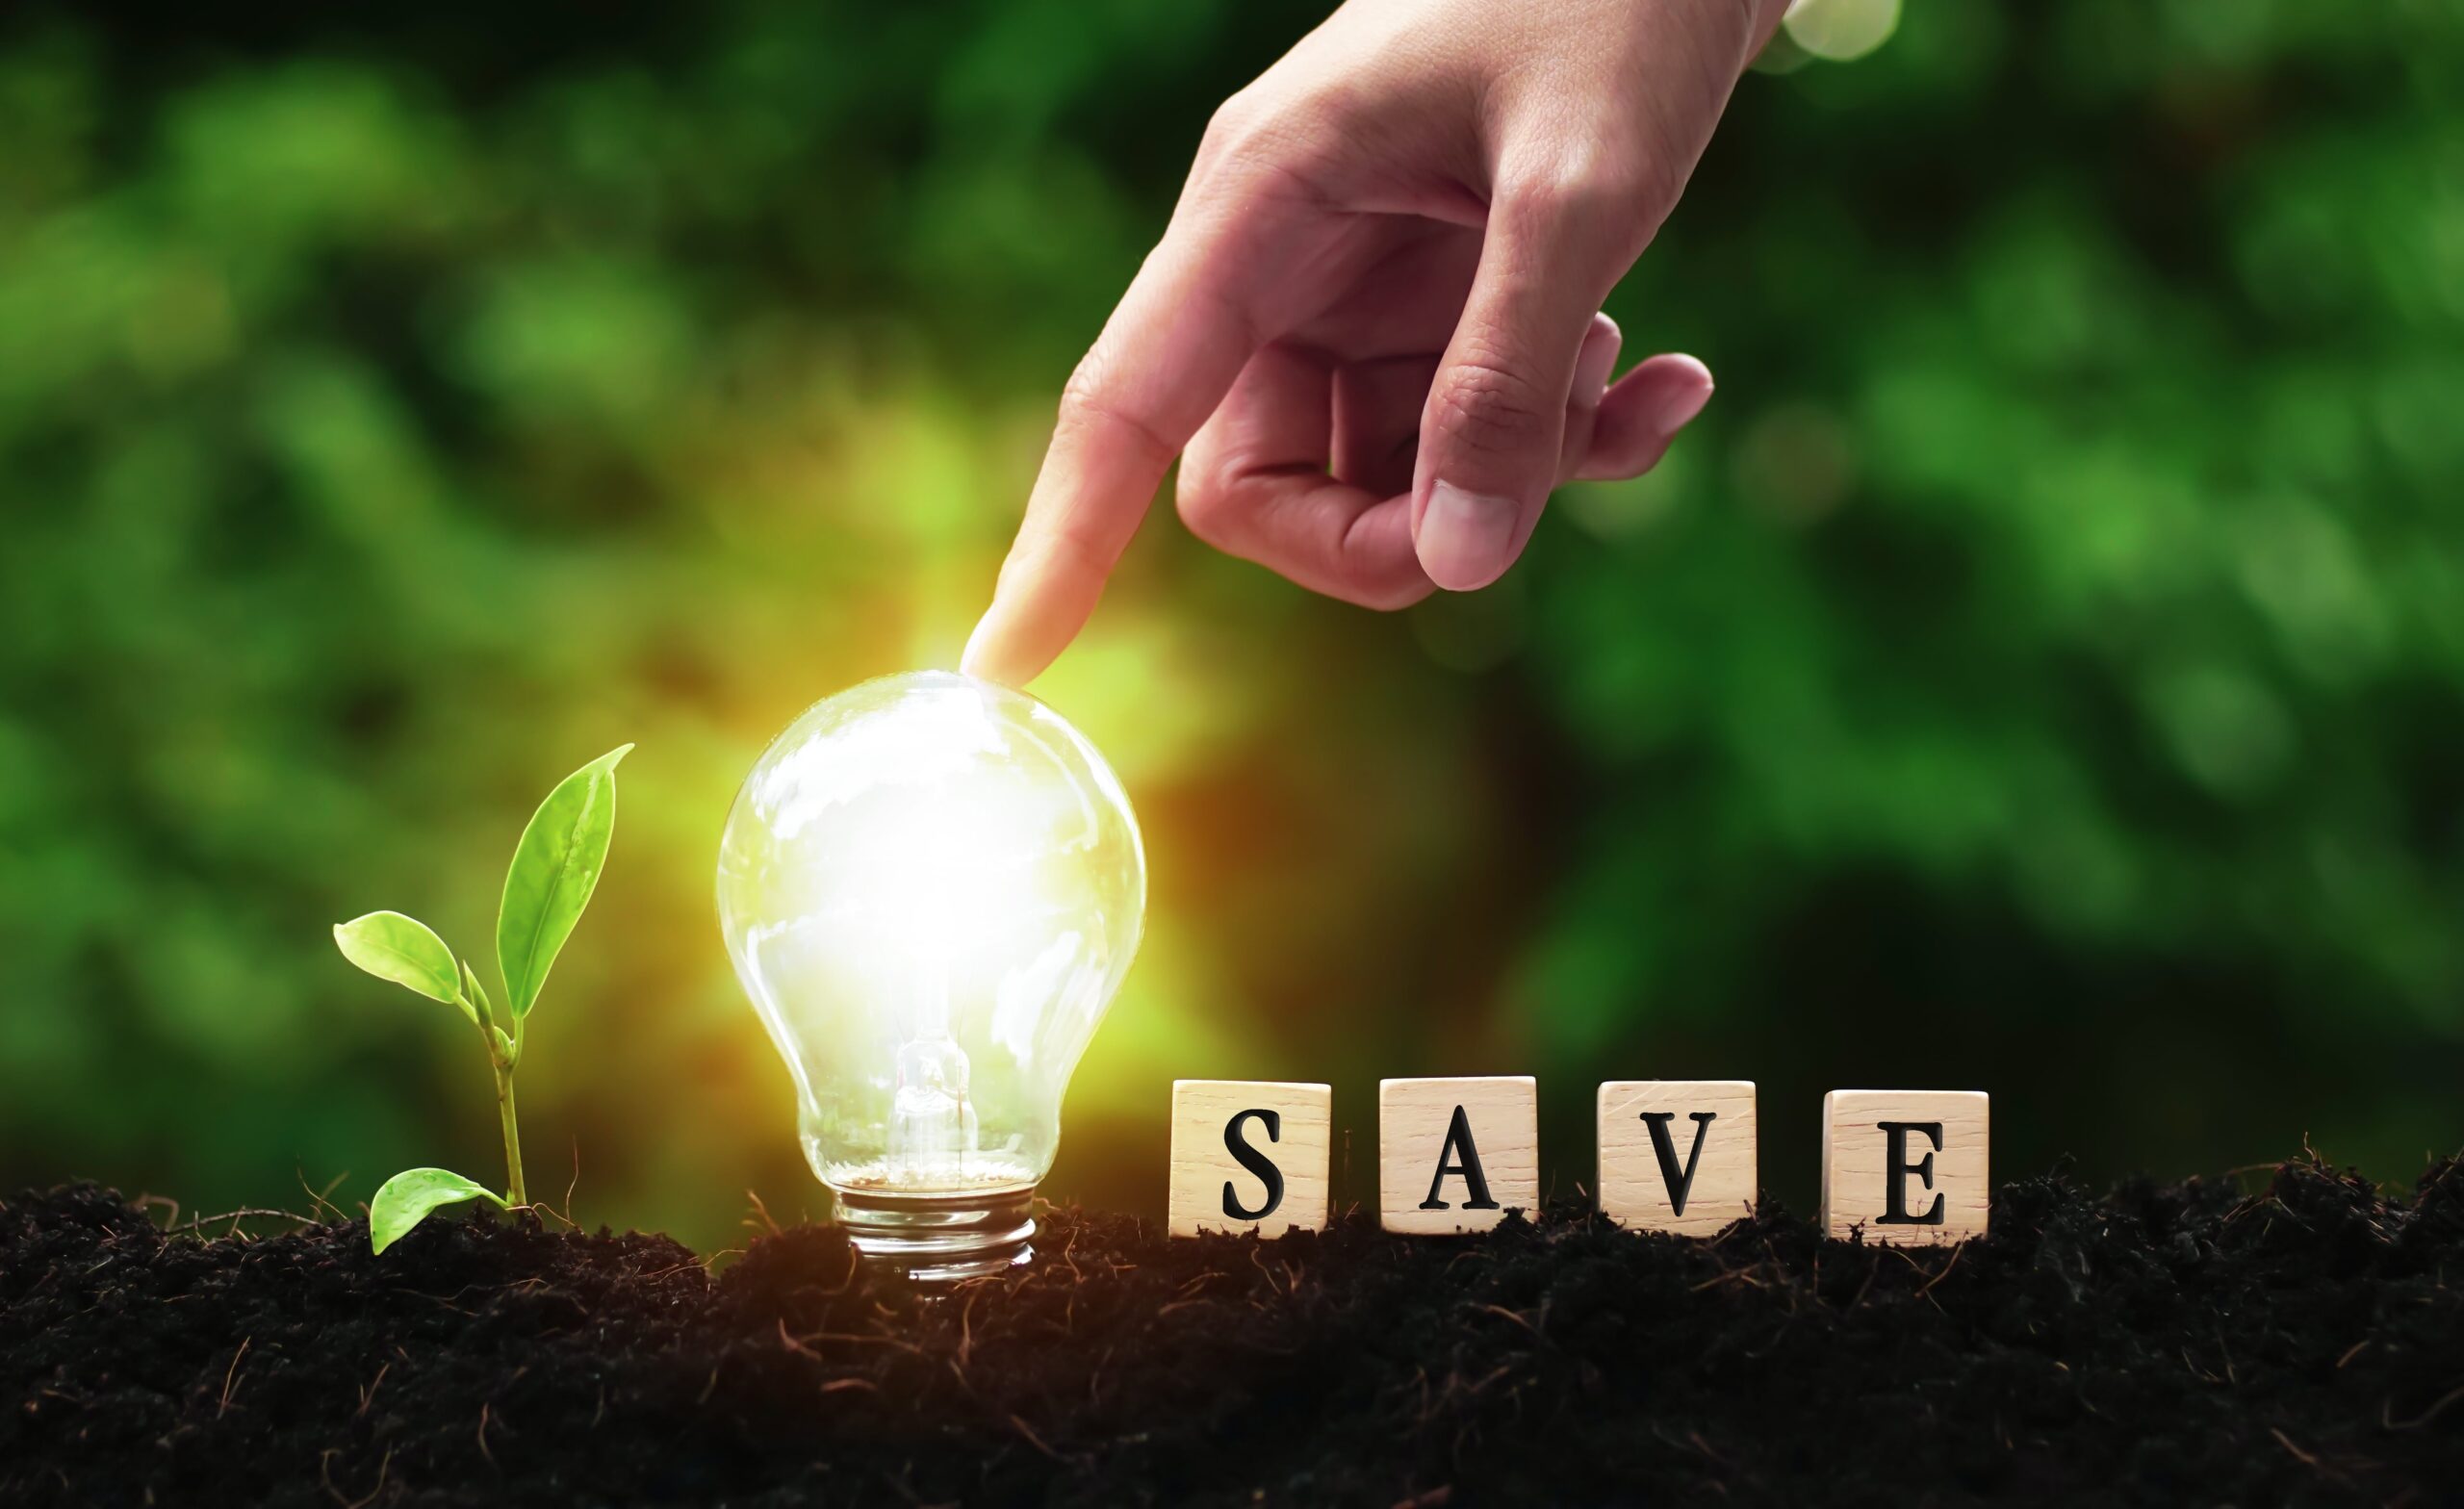 https://doradcy365.pl/wp-content/uploads/2022/09/hand-holding-light-bulb-with-small-plant-soil-with-save-message-block-sunlight-min-scaled.jpg